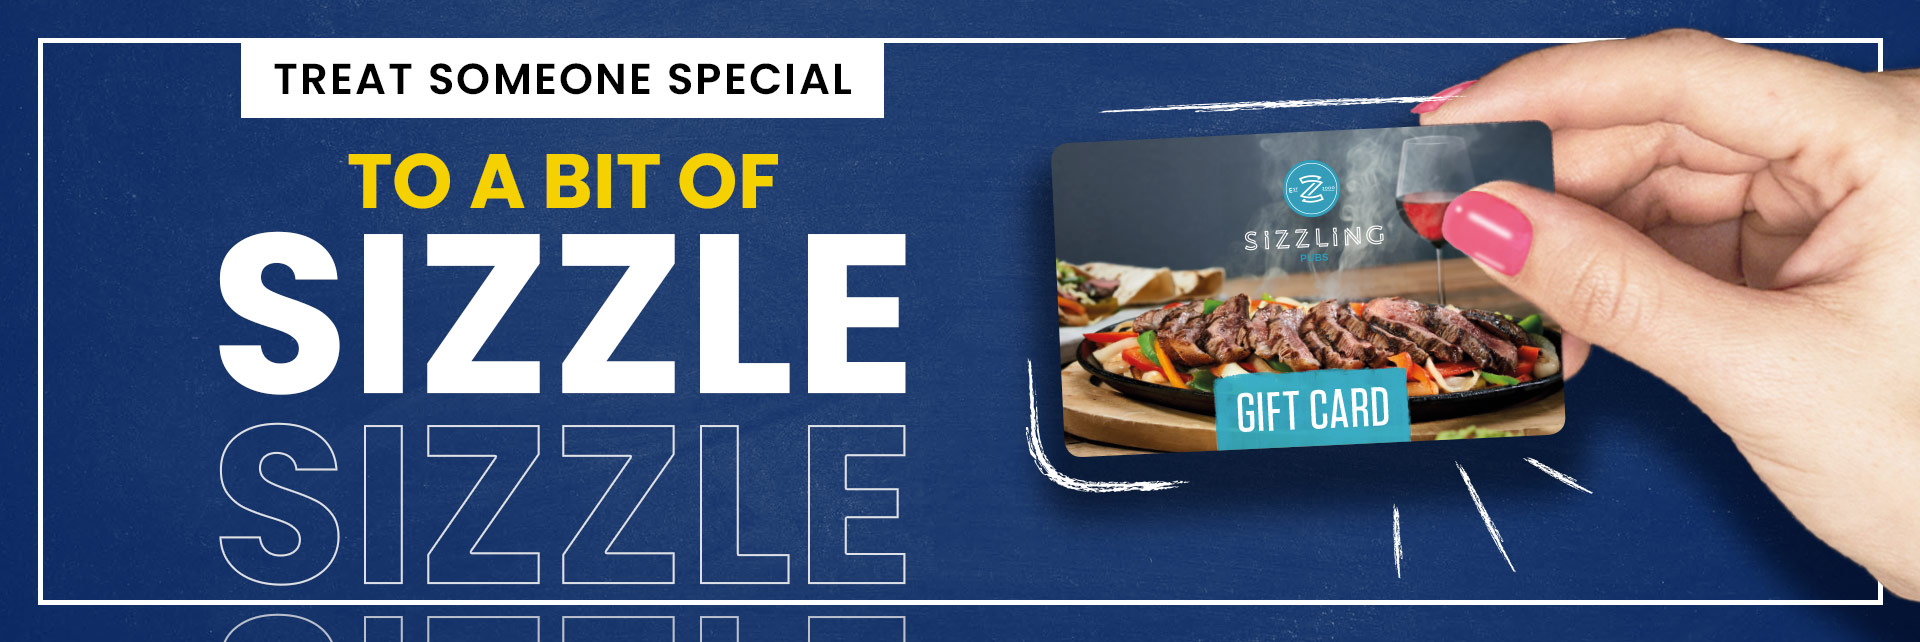 Sizzling Pubs Gift Card at The Cannon in Worksop